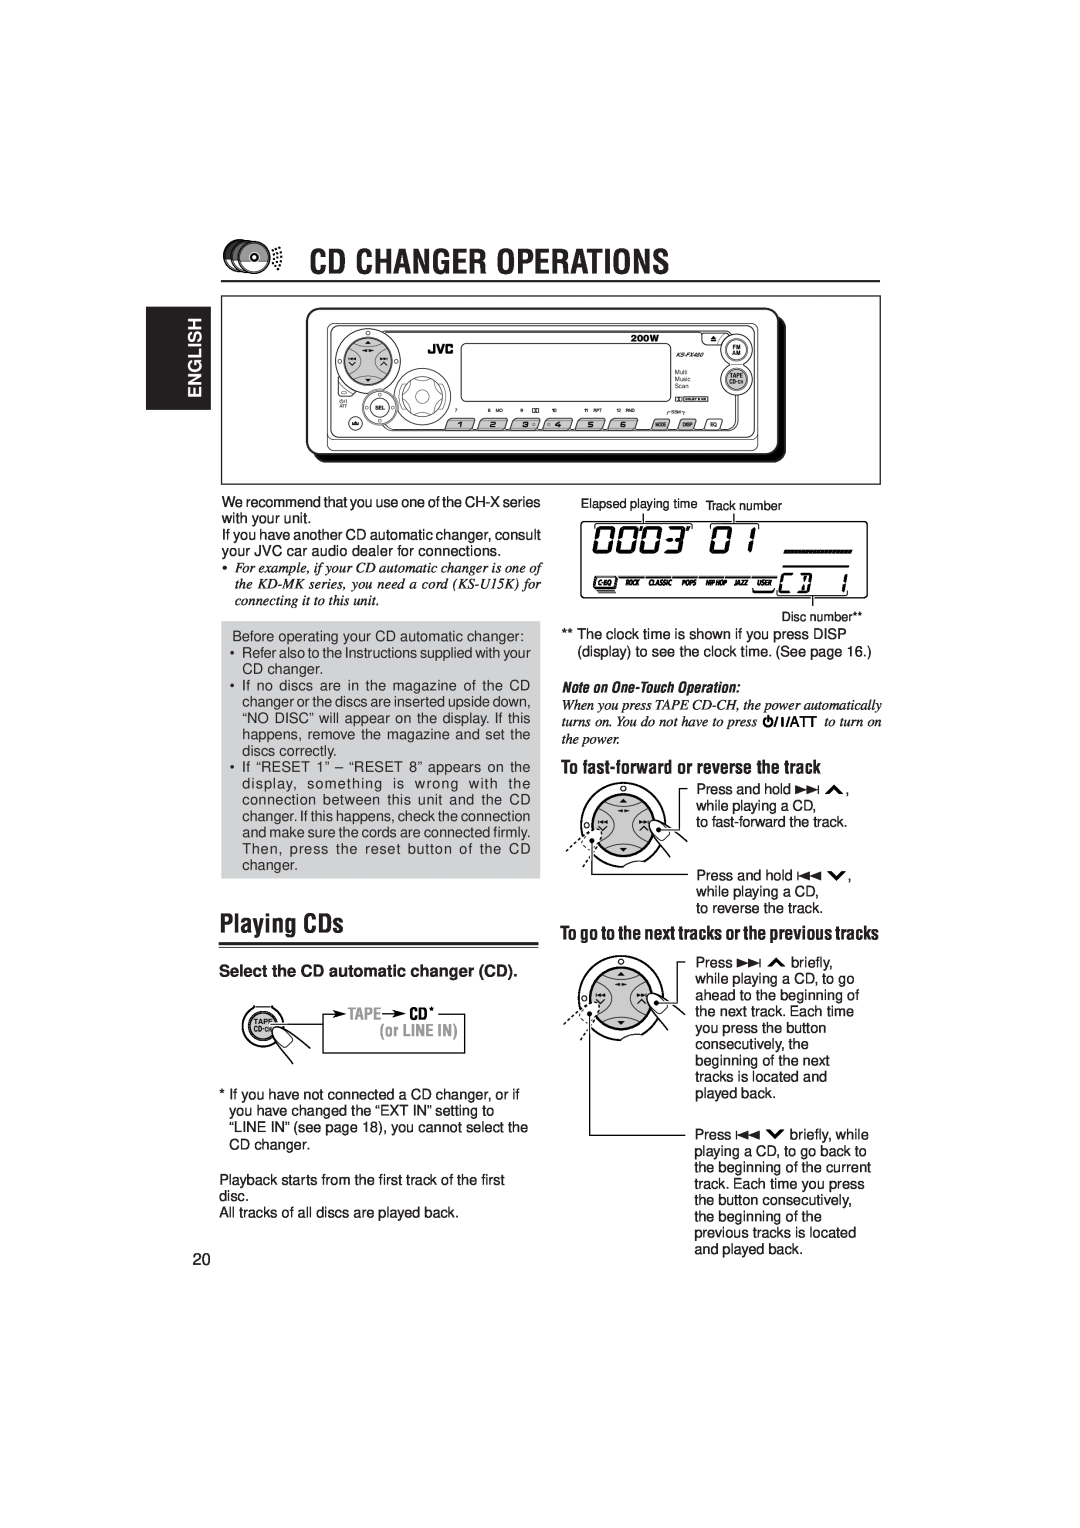 JVC KS-FX480J manual Cd Changer Operations, Playing CDs, To fast-forwardor reverse the track, English, Tape 